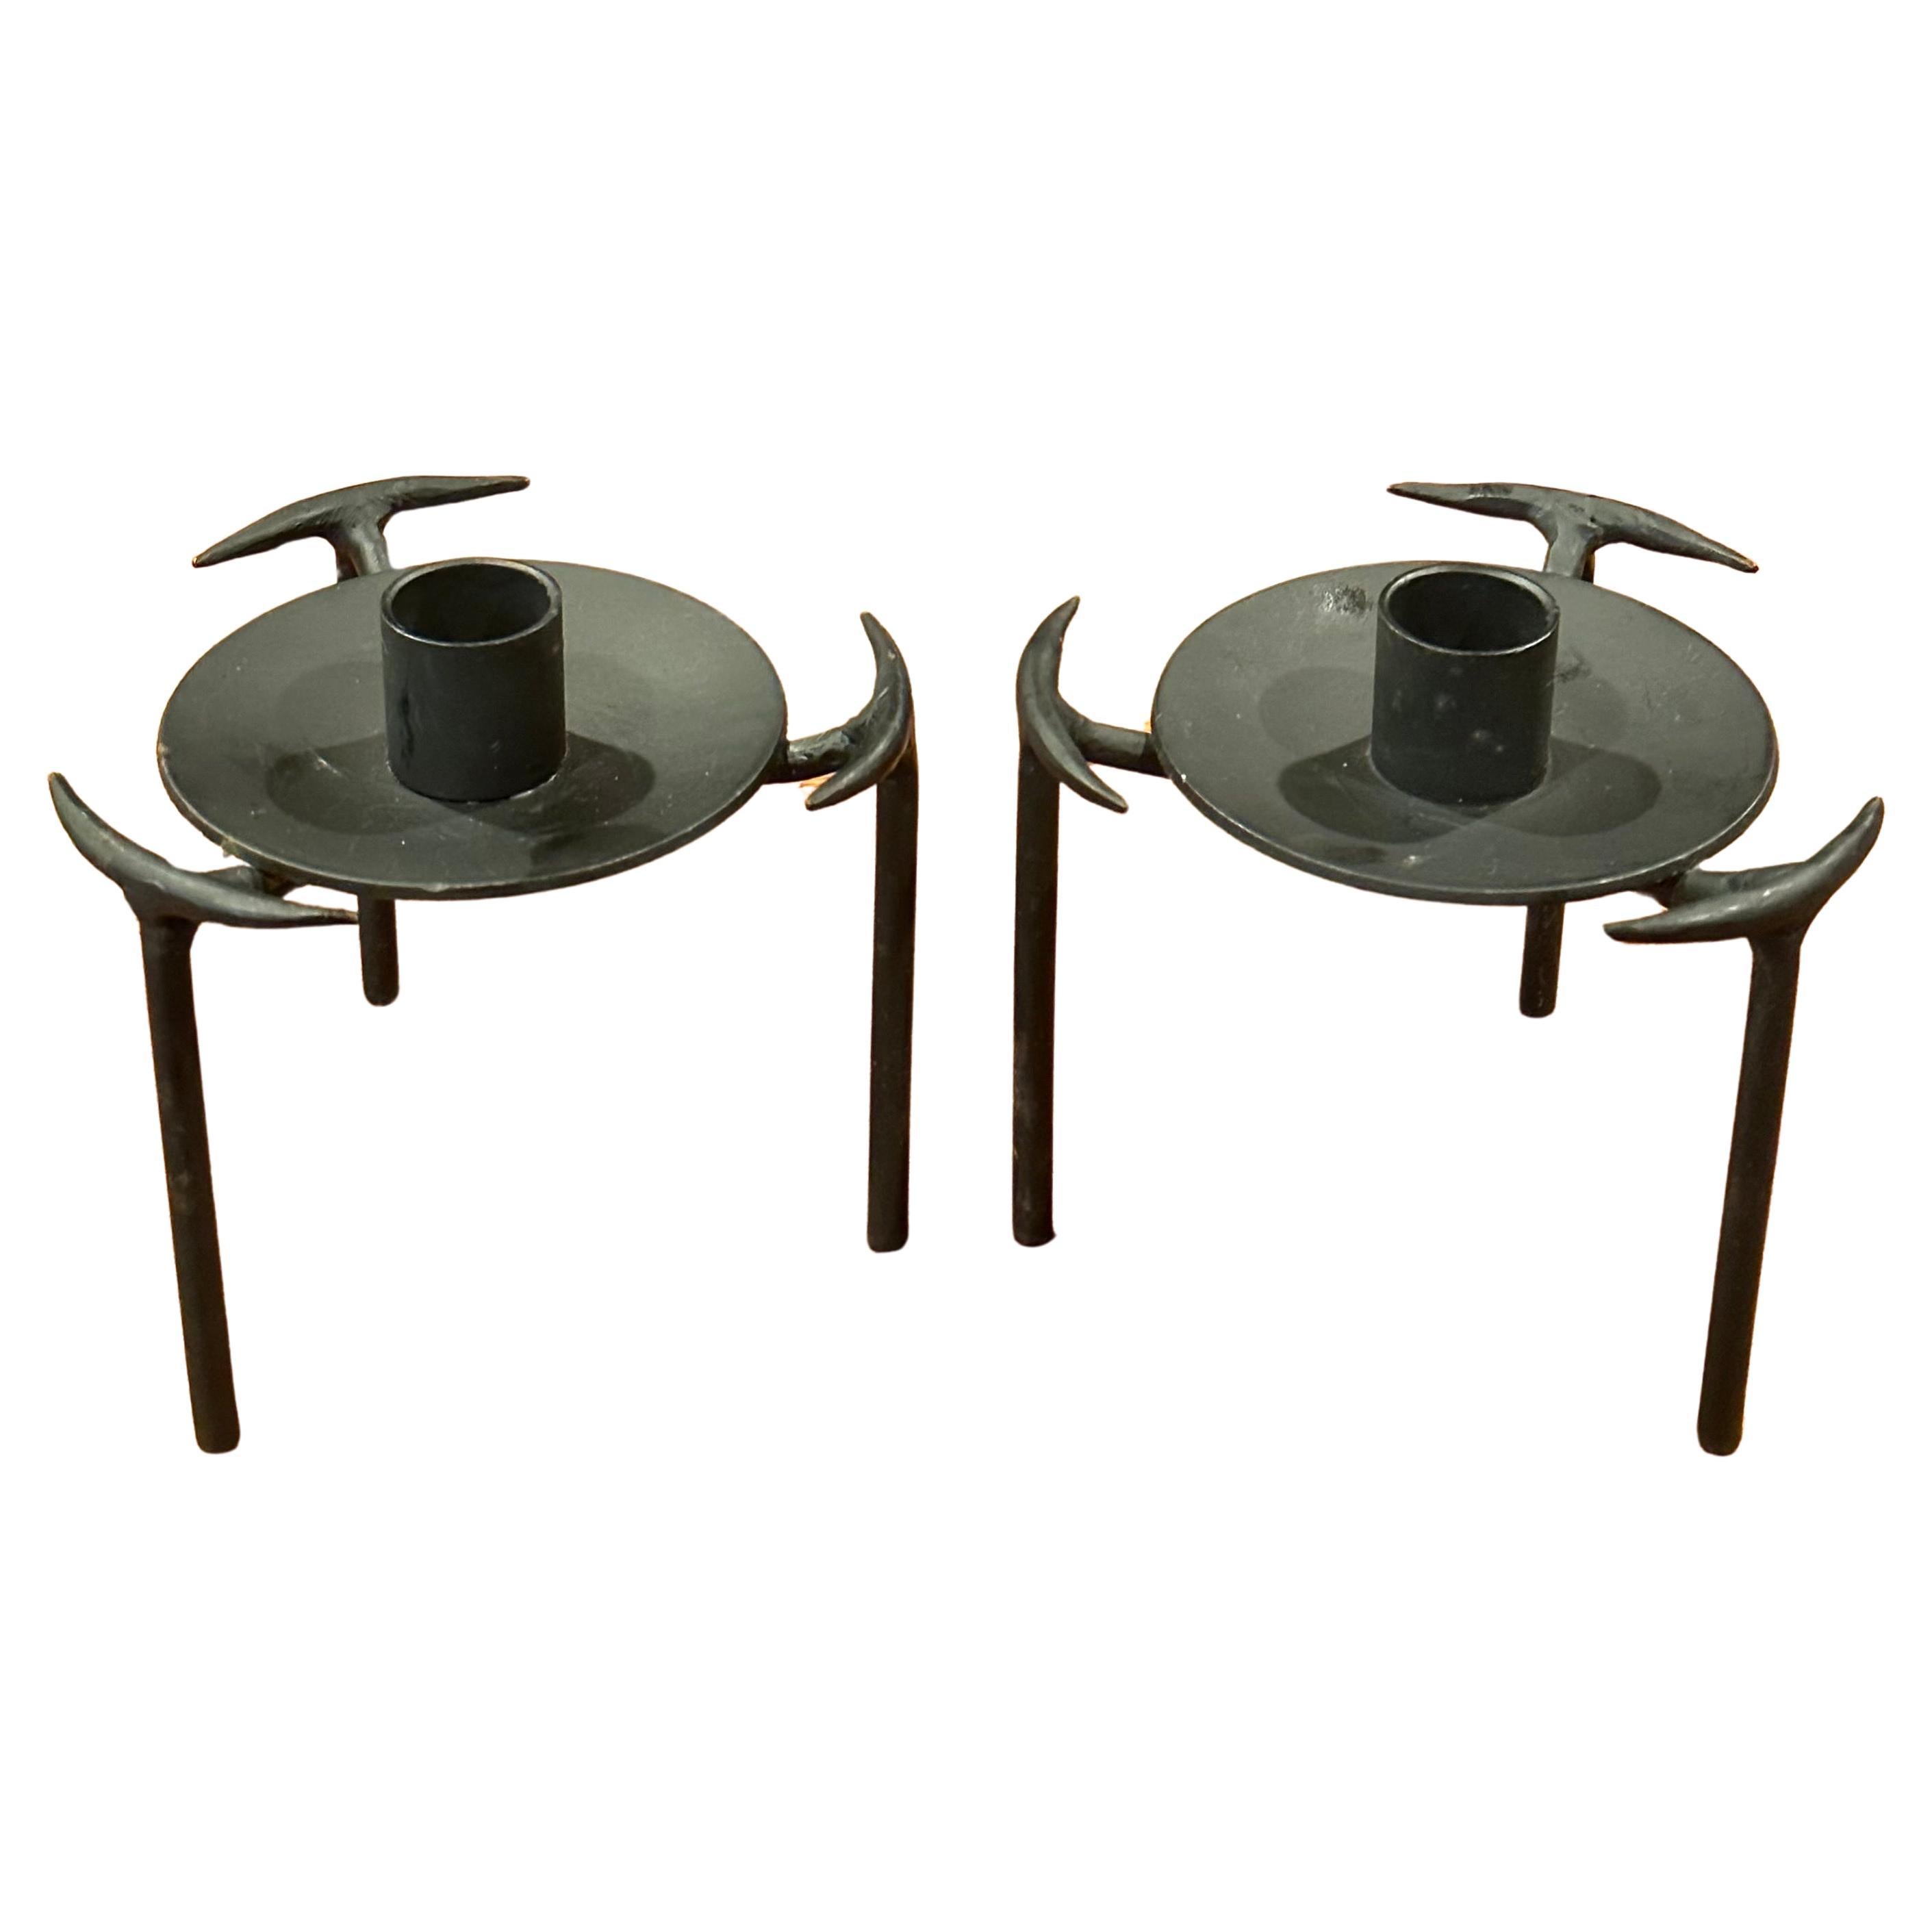 Pair of Modernist Cut Steel Candle Holders